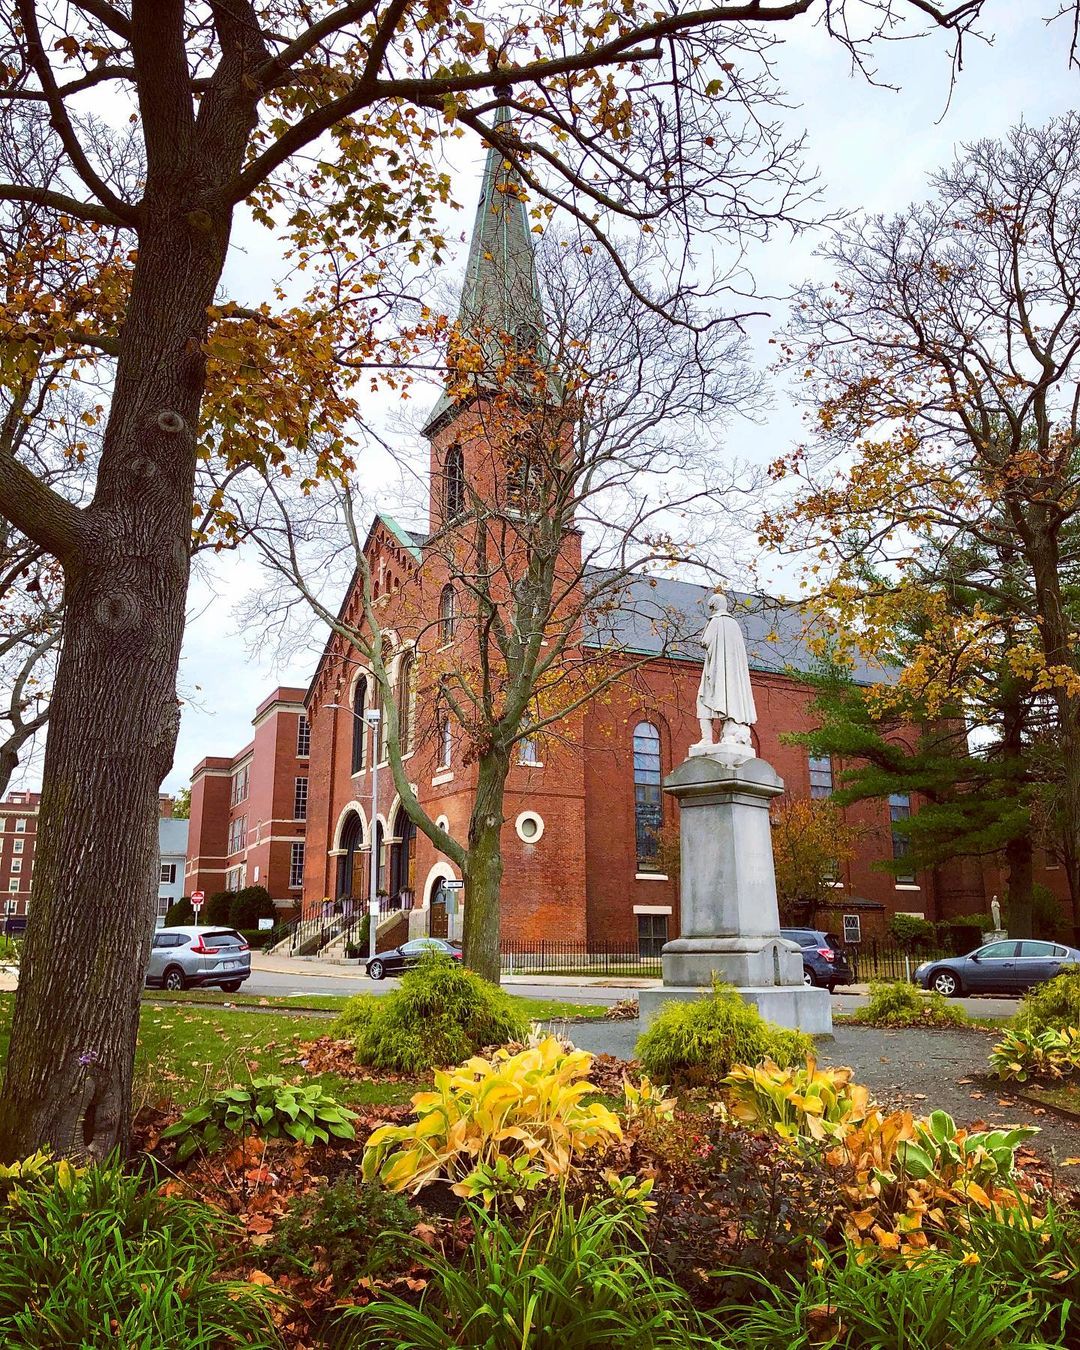 View of an Old Church on a Rainy Fall Day in Salem, MA. Photo by Instagram user @tiffanybrooke27